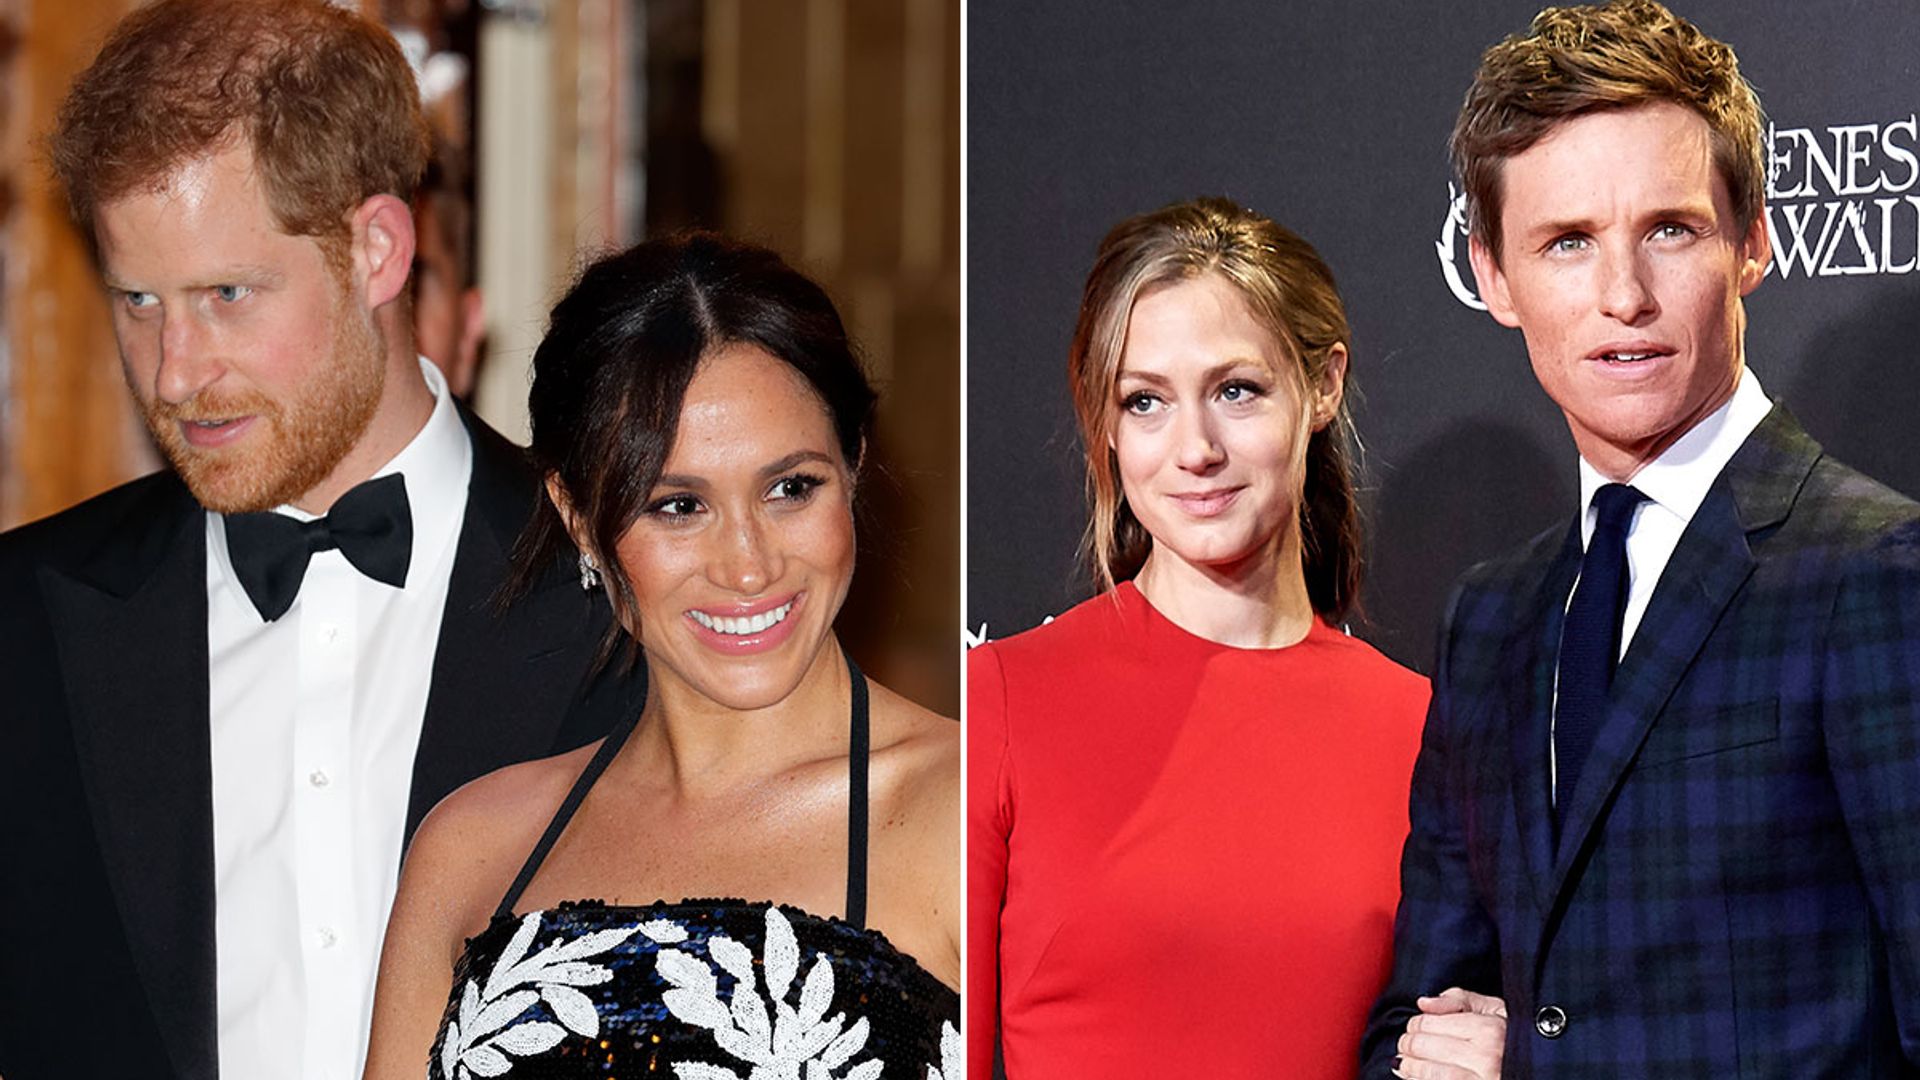 Prince Harry and Meghan Markle hung out with Eddie Redmayne at their Cotswolds home